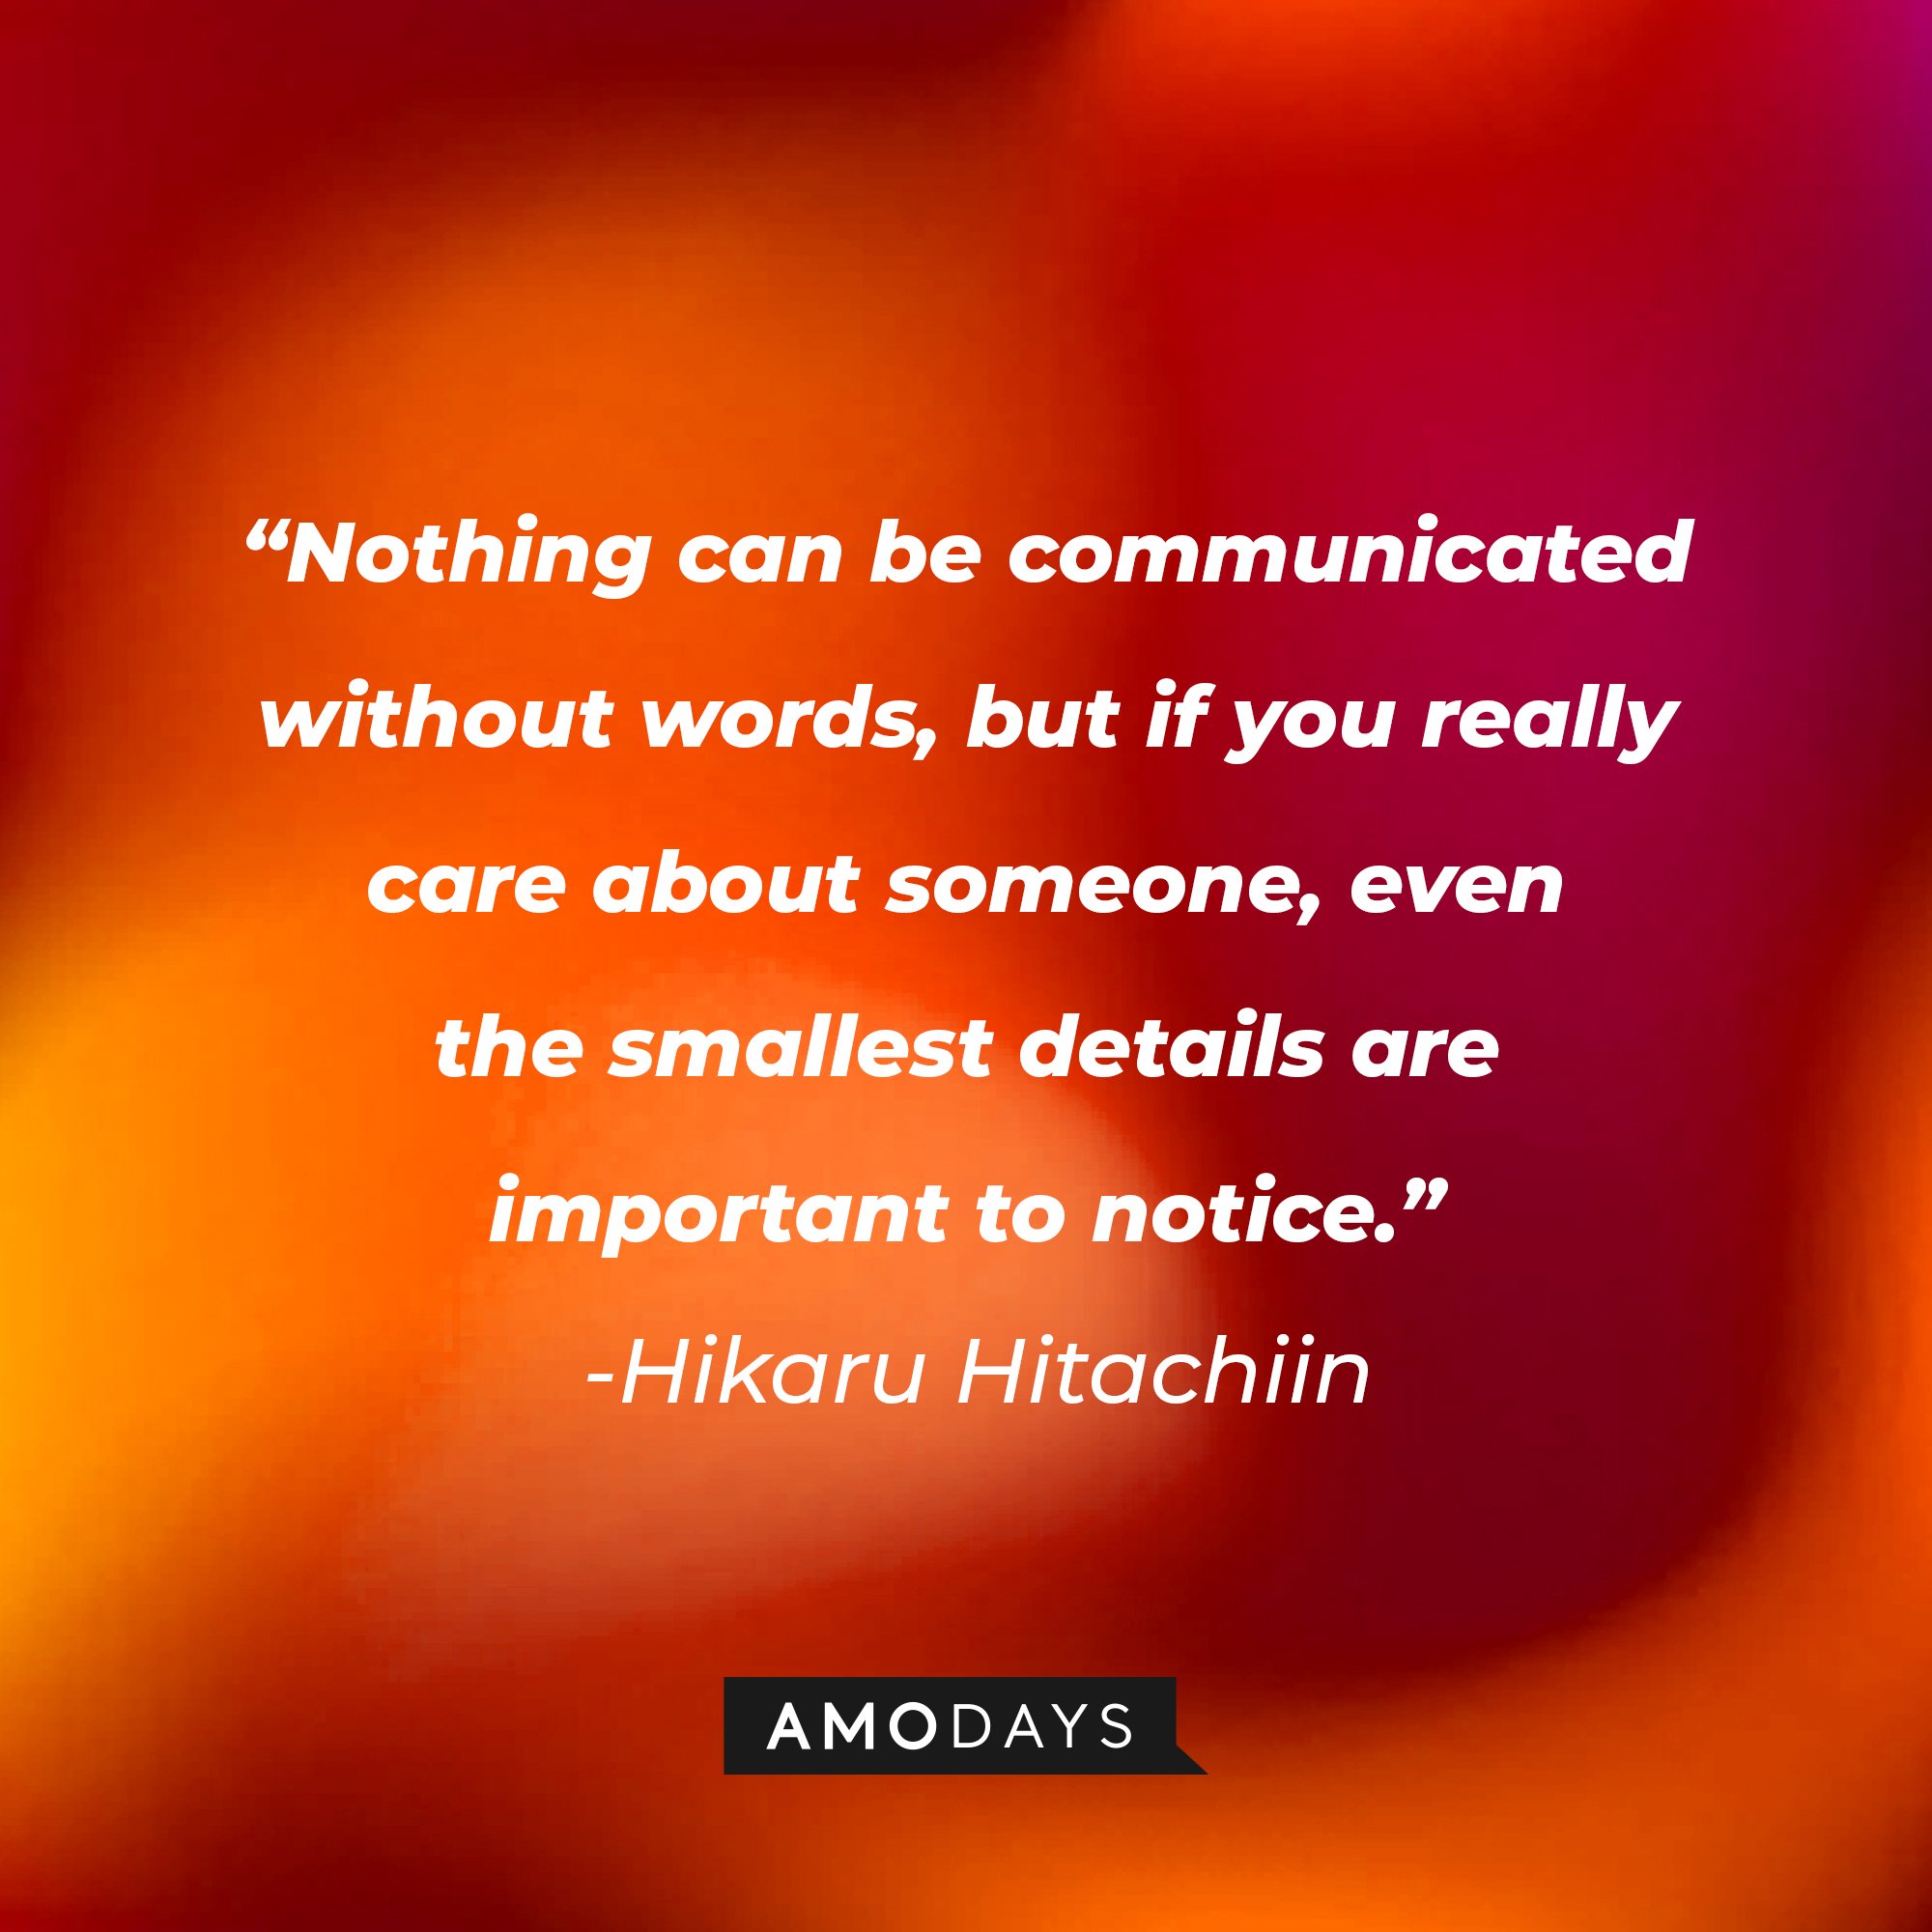 Hikaru Hitachiin’s quote: "Nothing can be communicated without words, but if you really care about someone, even the smallest details are important to notice." | Image: AmoDays